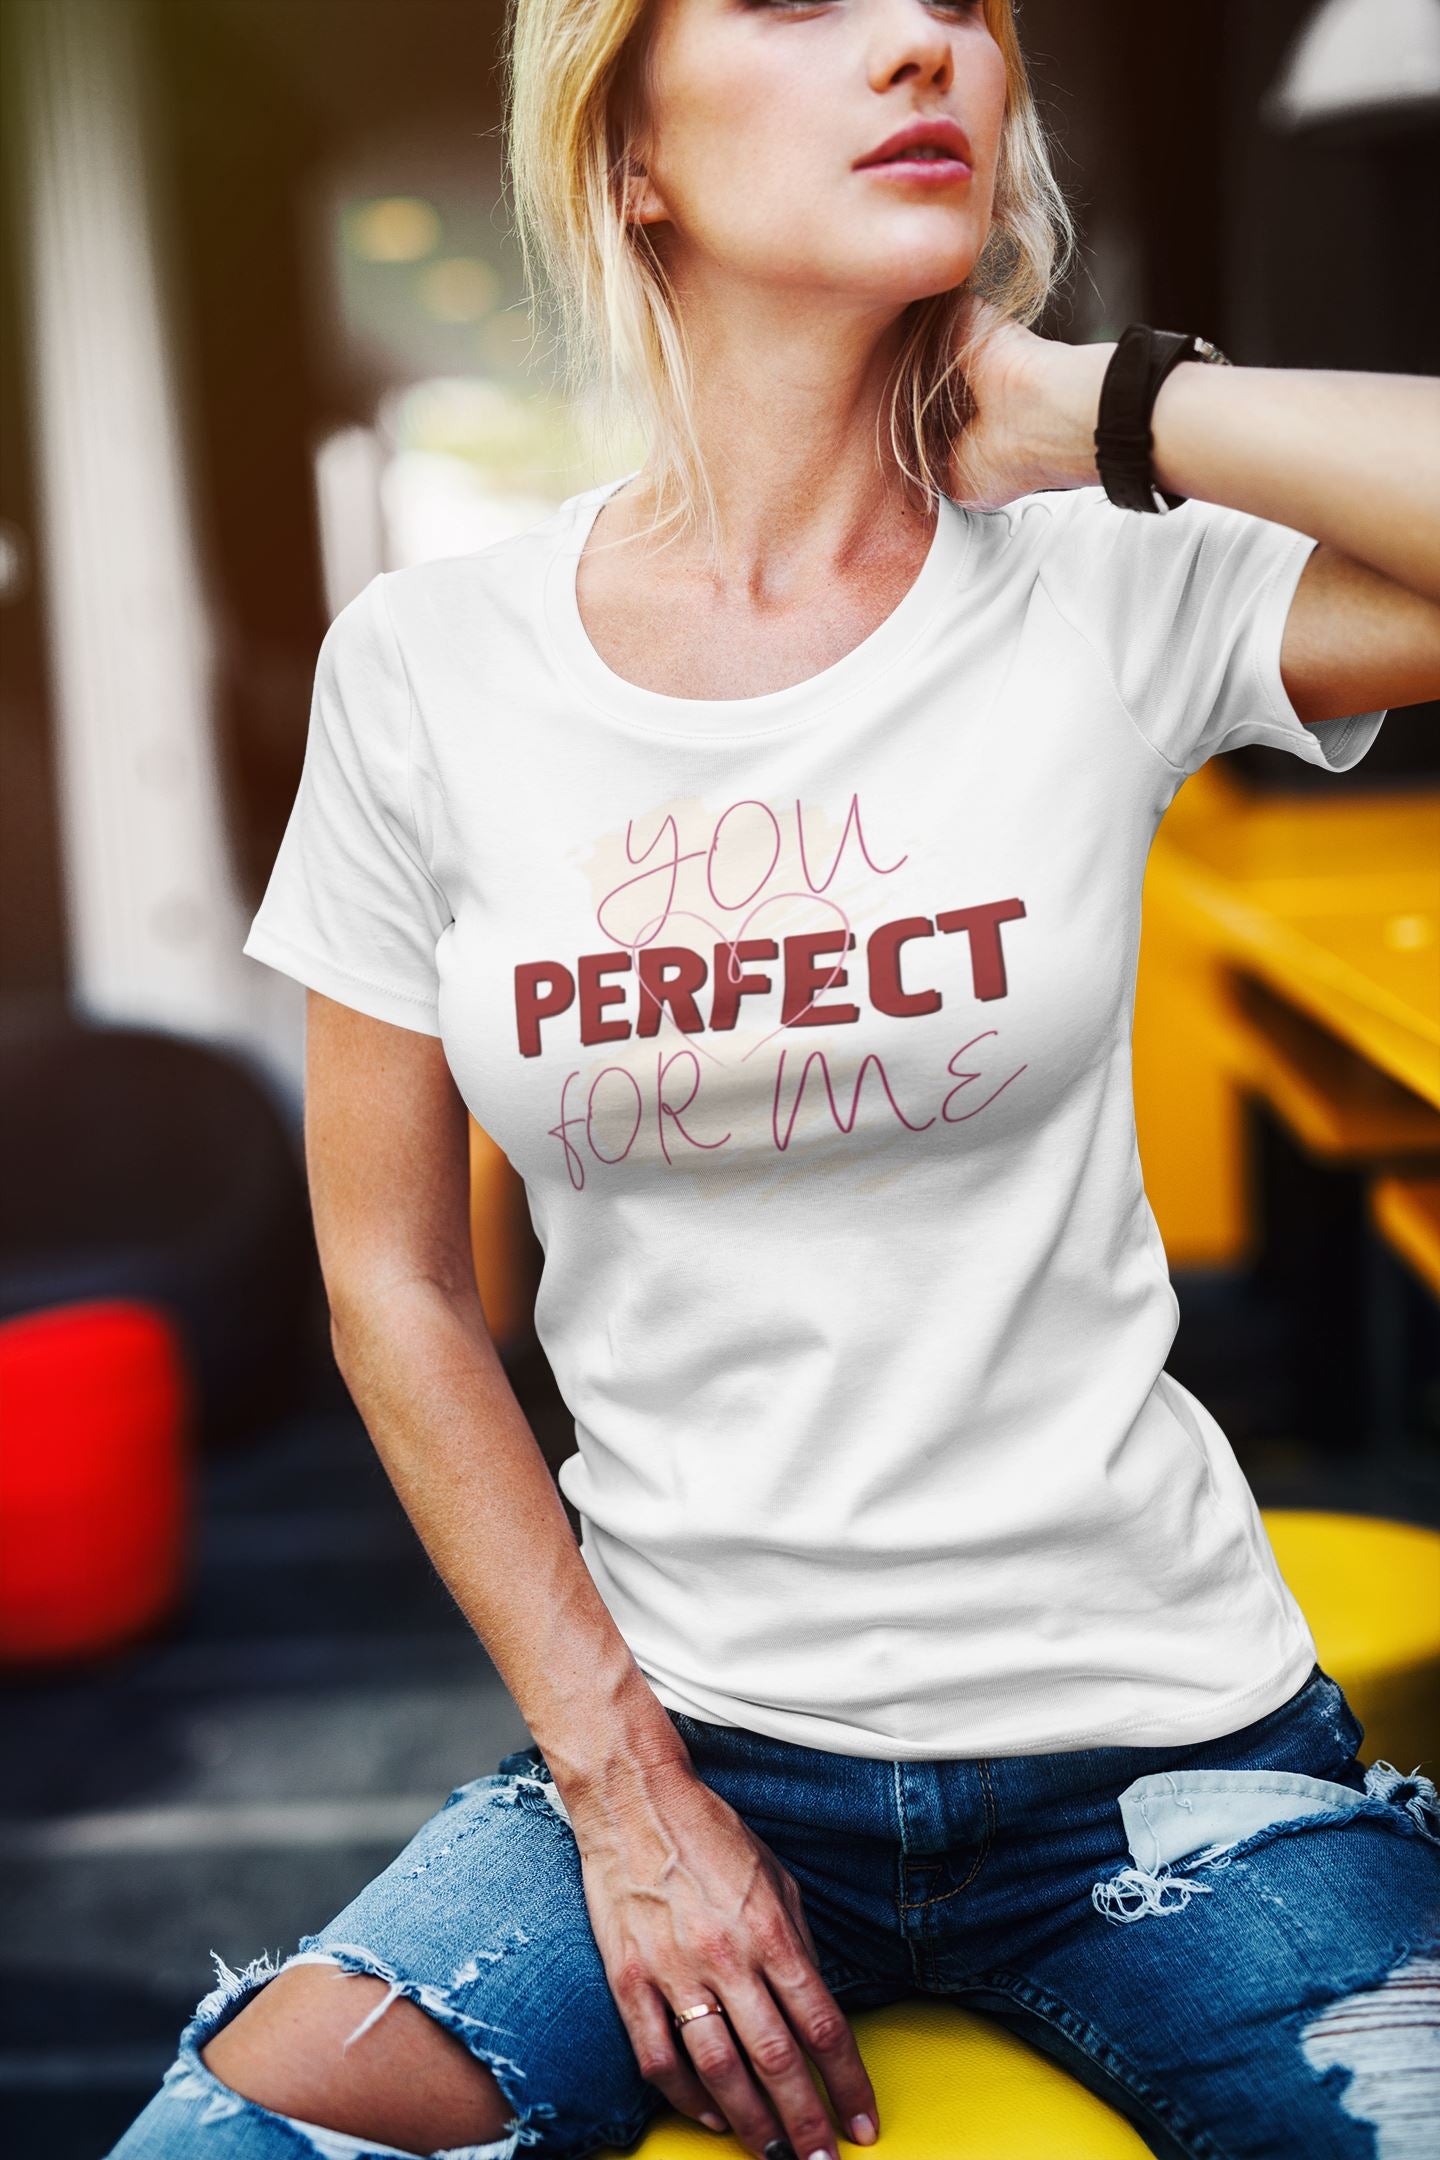 You Are Perfect for Me Special Matching Couple T Shirt for Men and Women freeshipping - Catch My Drift India